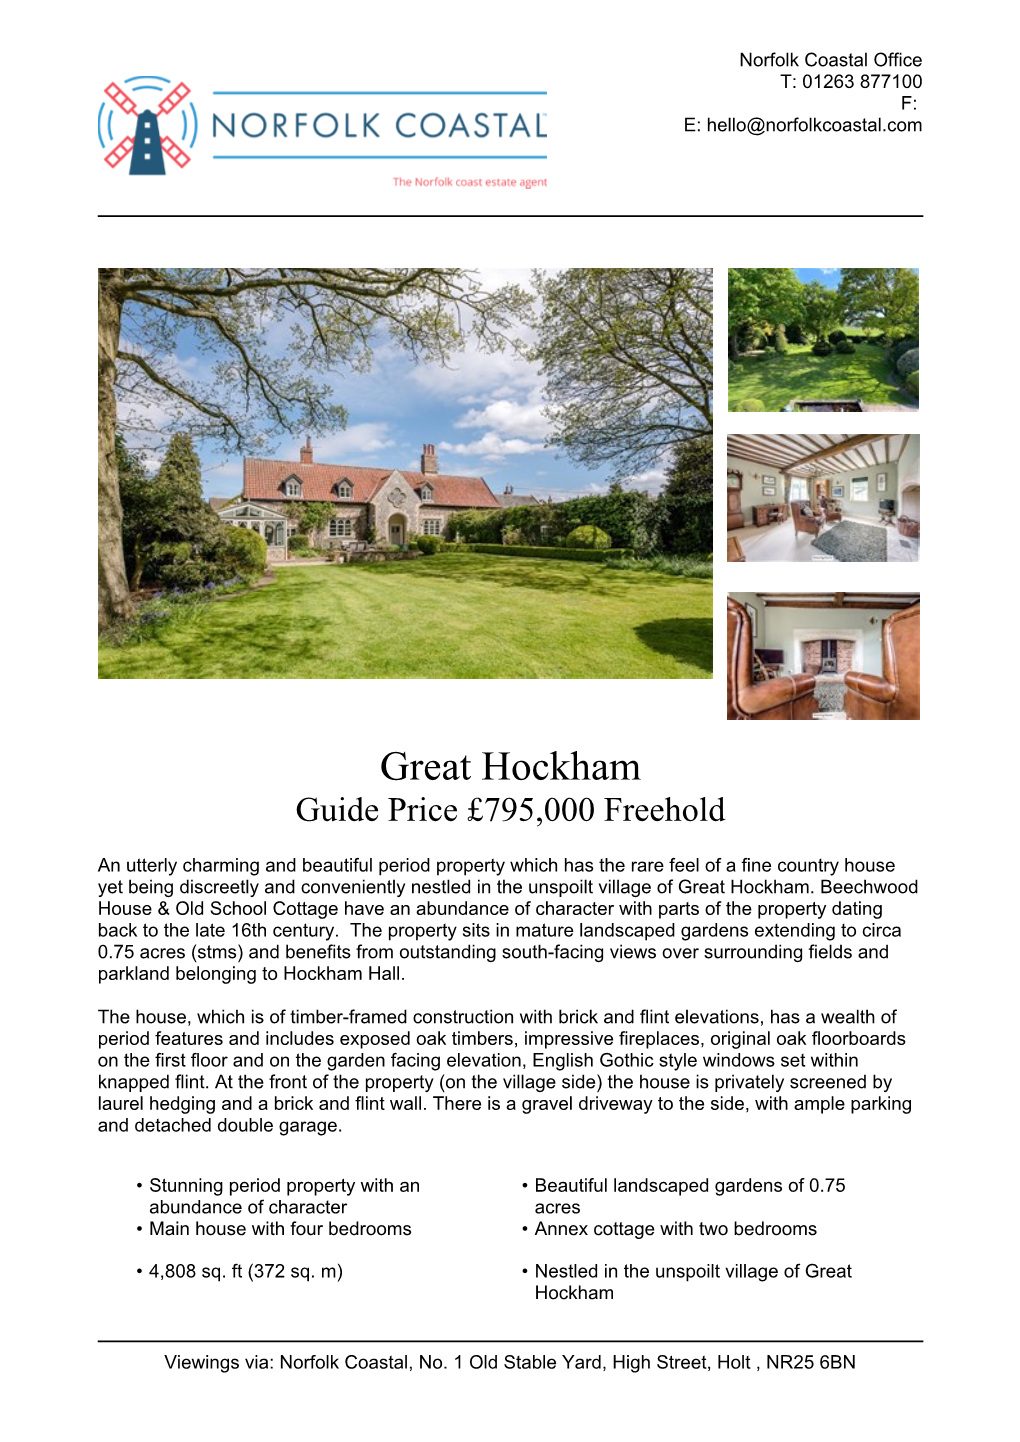 Great Hockham Guide Price £795,000 Freehold